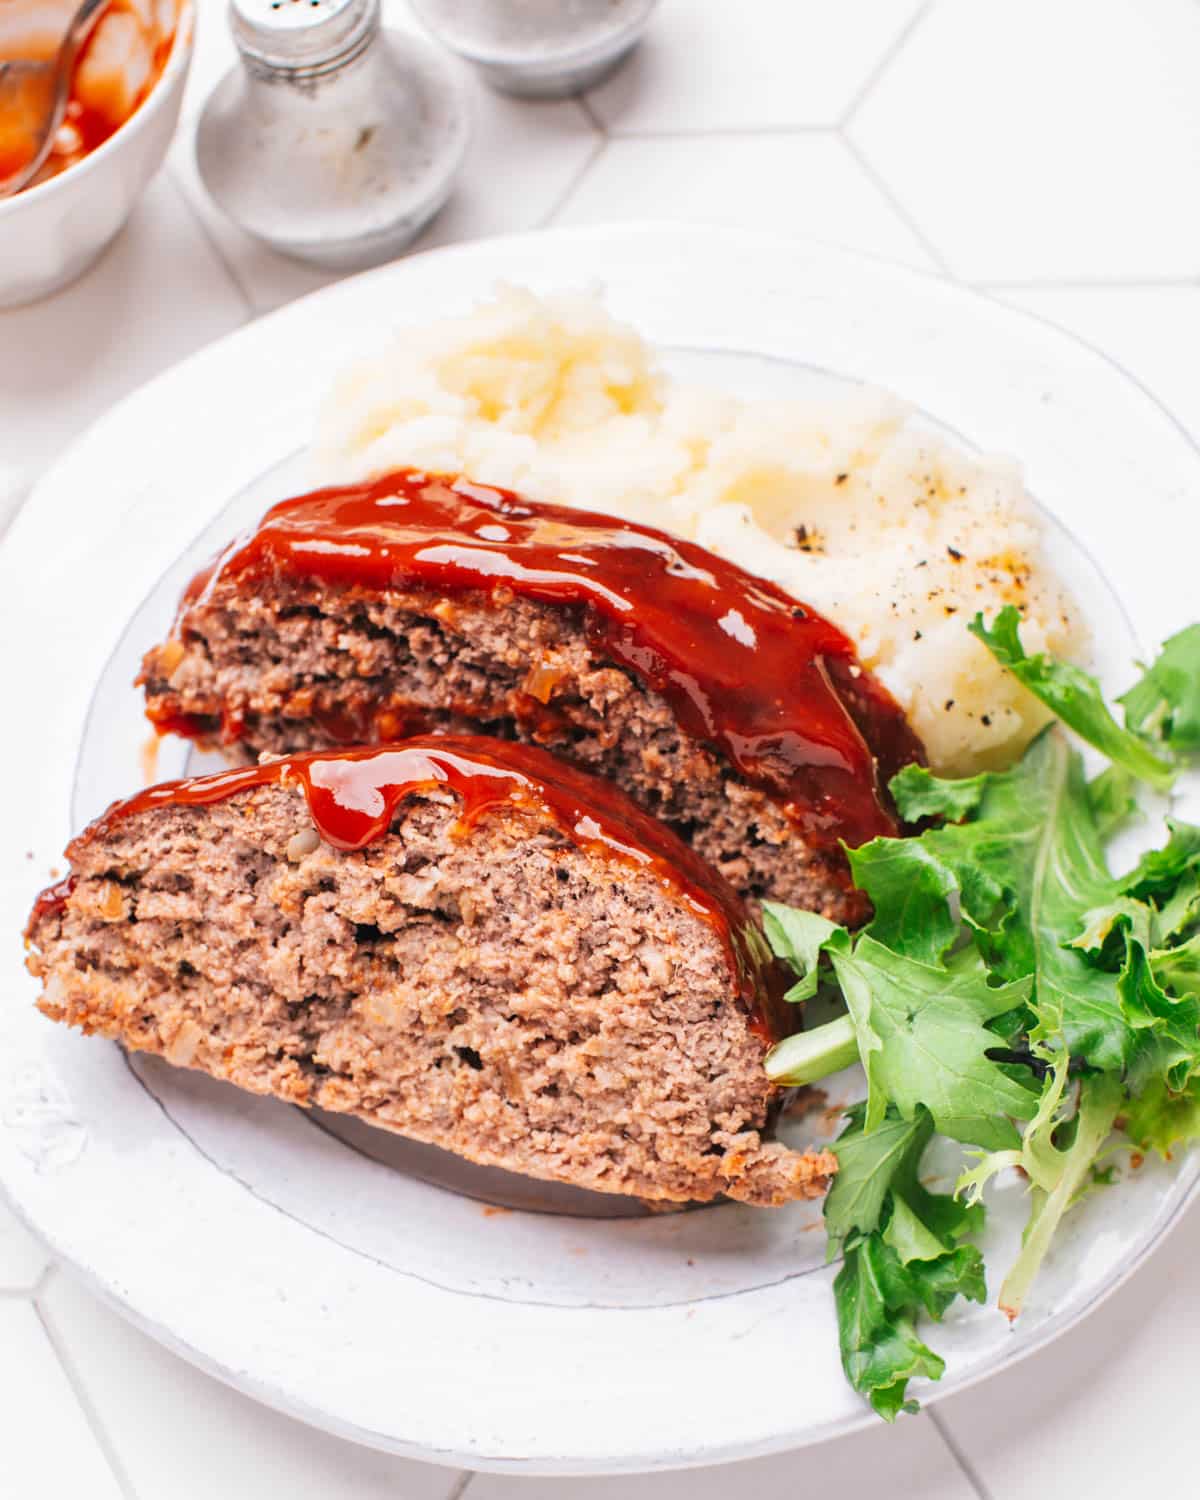 Meatloaf reheated in microwave on a plate.